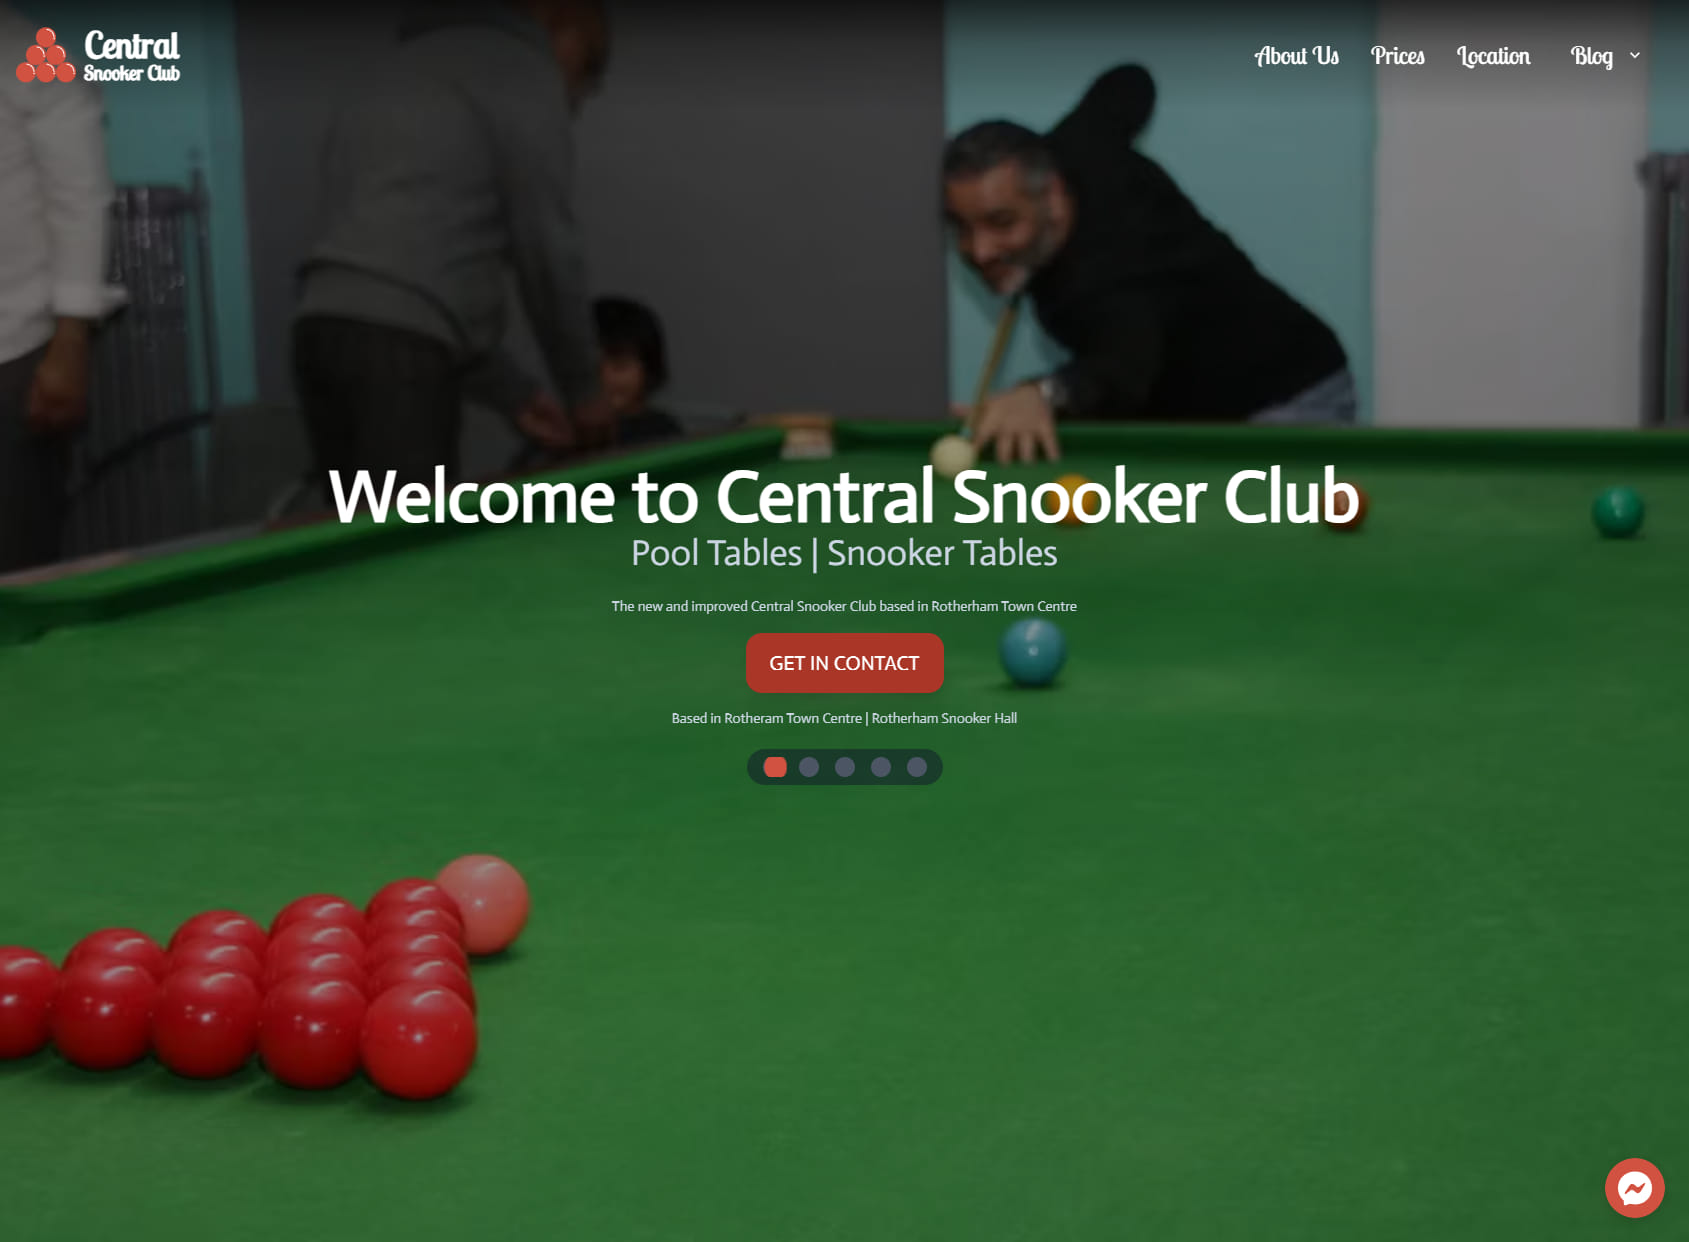 Central Snooker Club